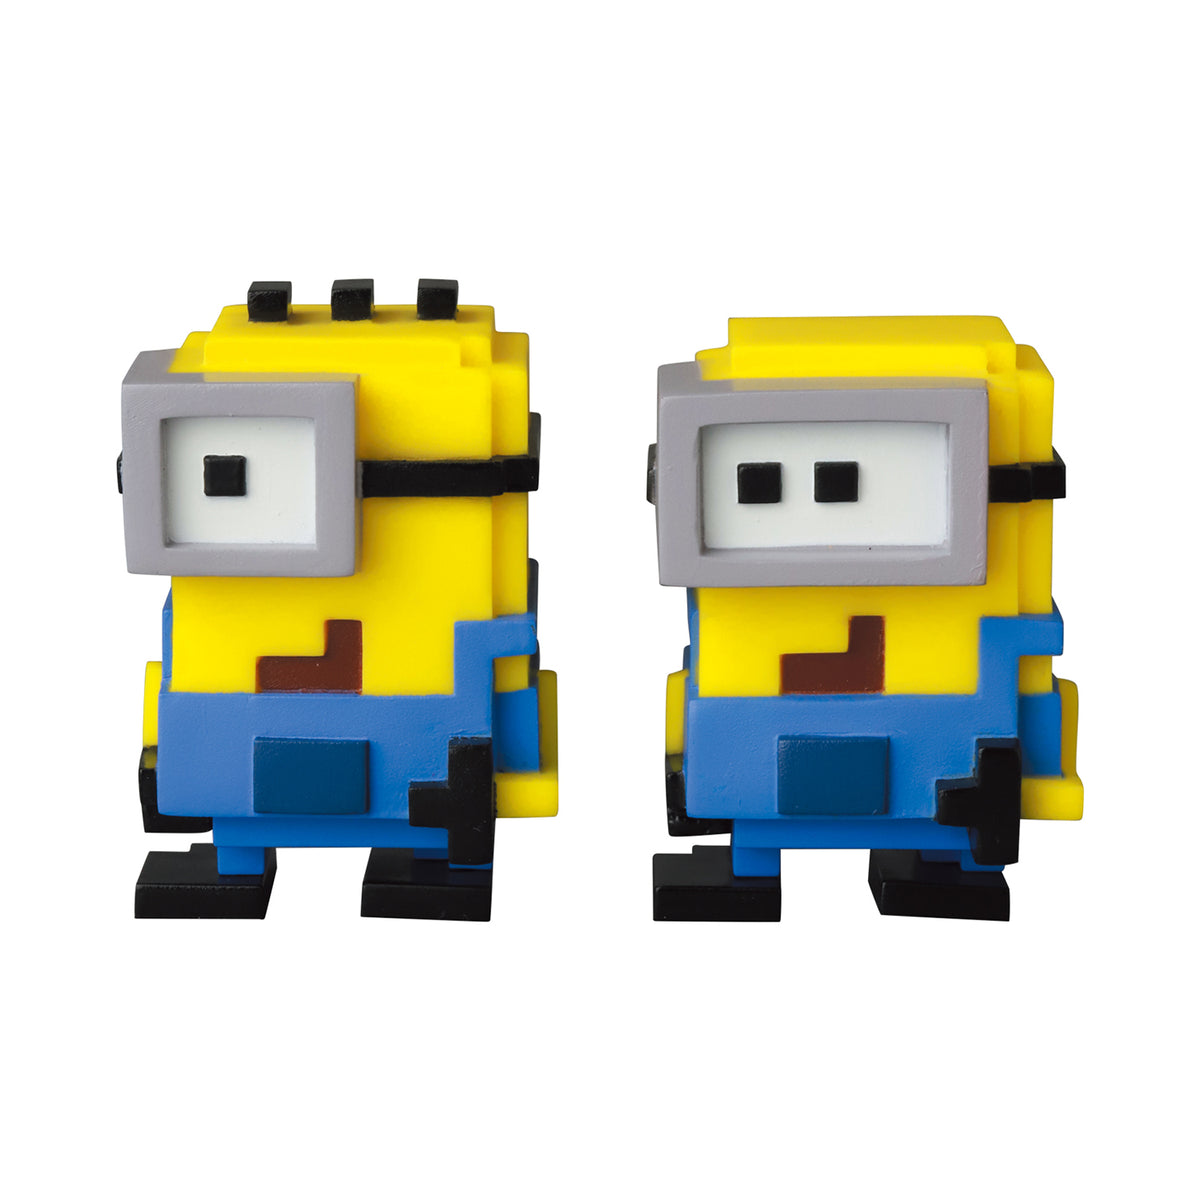 VCD Pharrell Williams and Minions